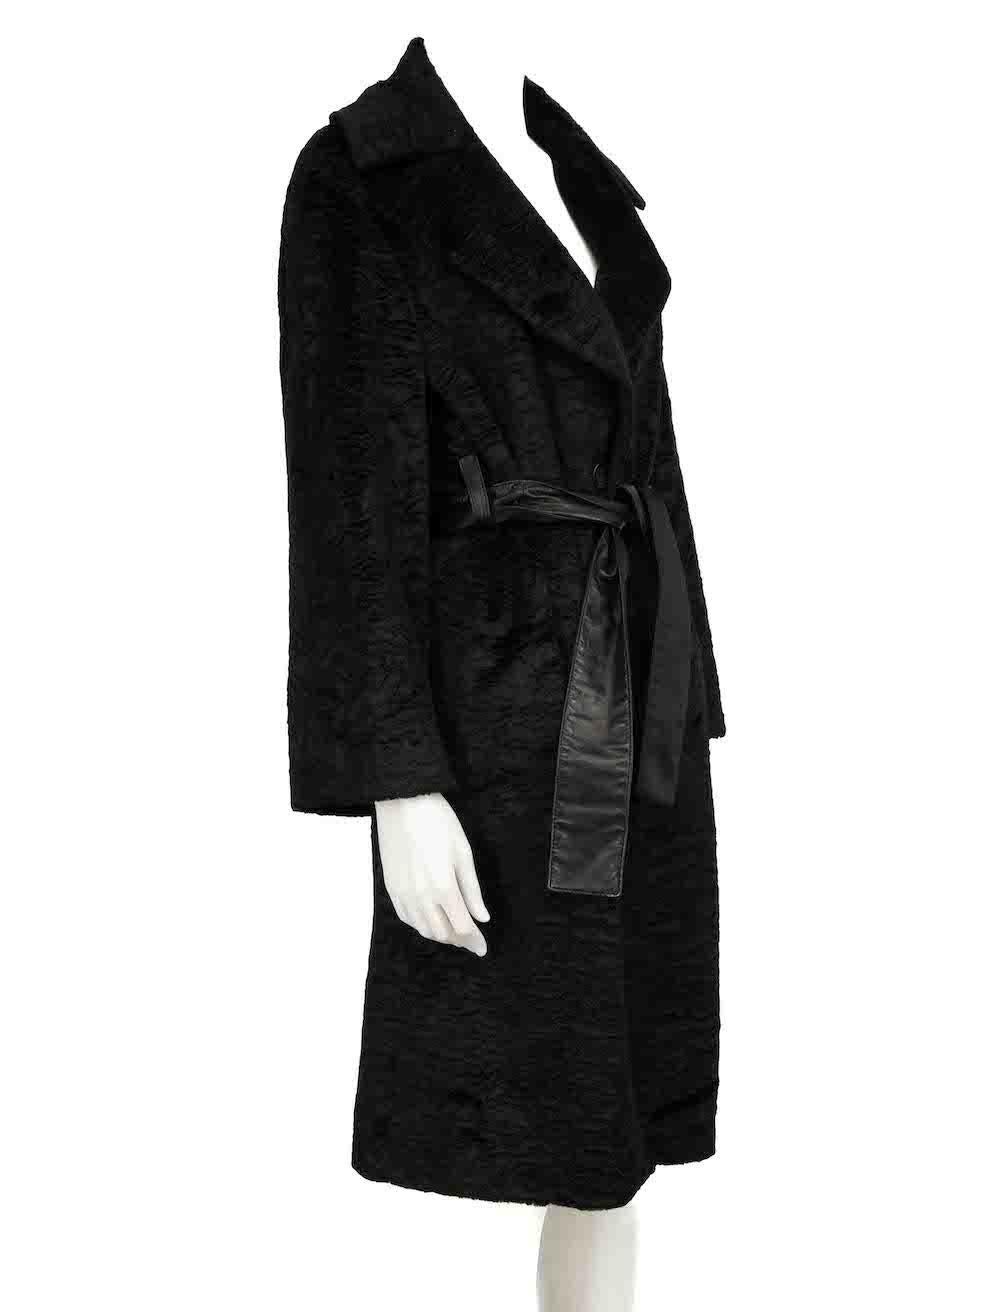 CONDITION is Very good. Hardly any visible wear to coat is evident on this used Just Cavalli designer resale item.
 
 
 
 Details
 
 
 Black
 
 Viscose
 
 Coat
 
 Leather belt
 
 Single breasted
 
 Belted
 
 2x Side pockets
 
 
 
 
 
 Made in Italy
